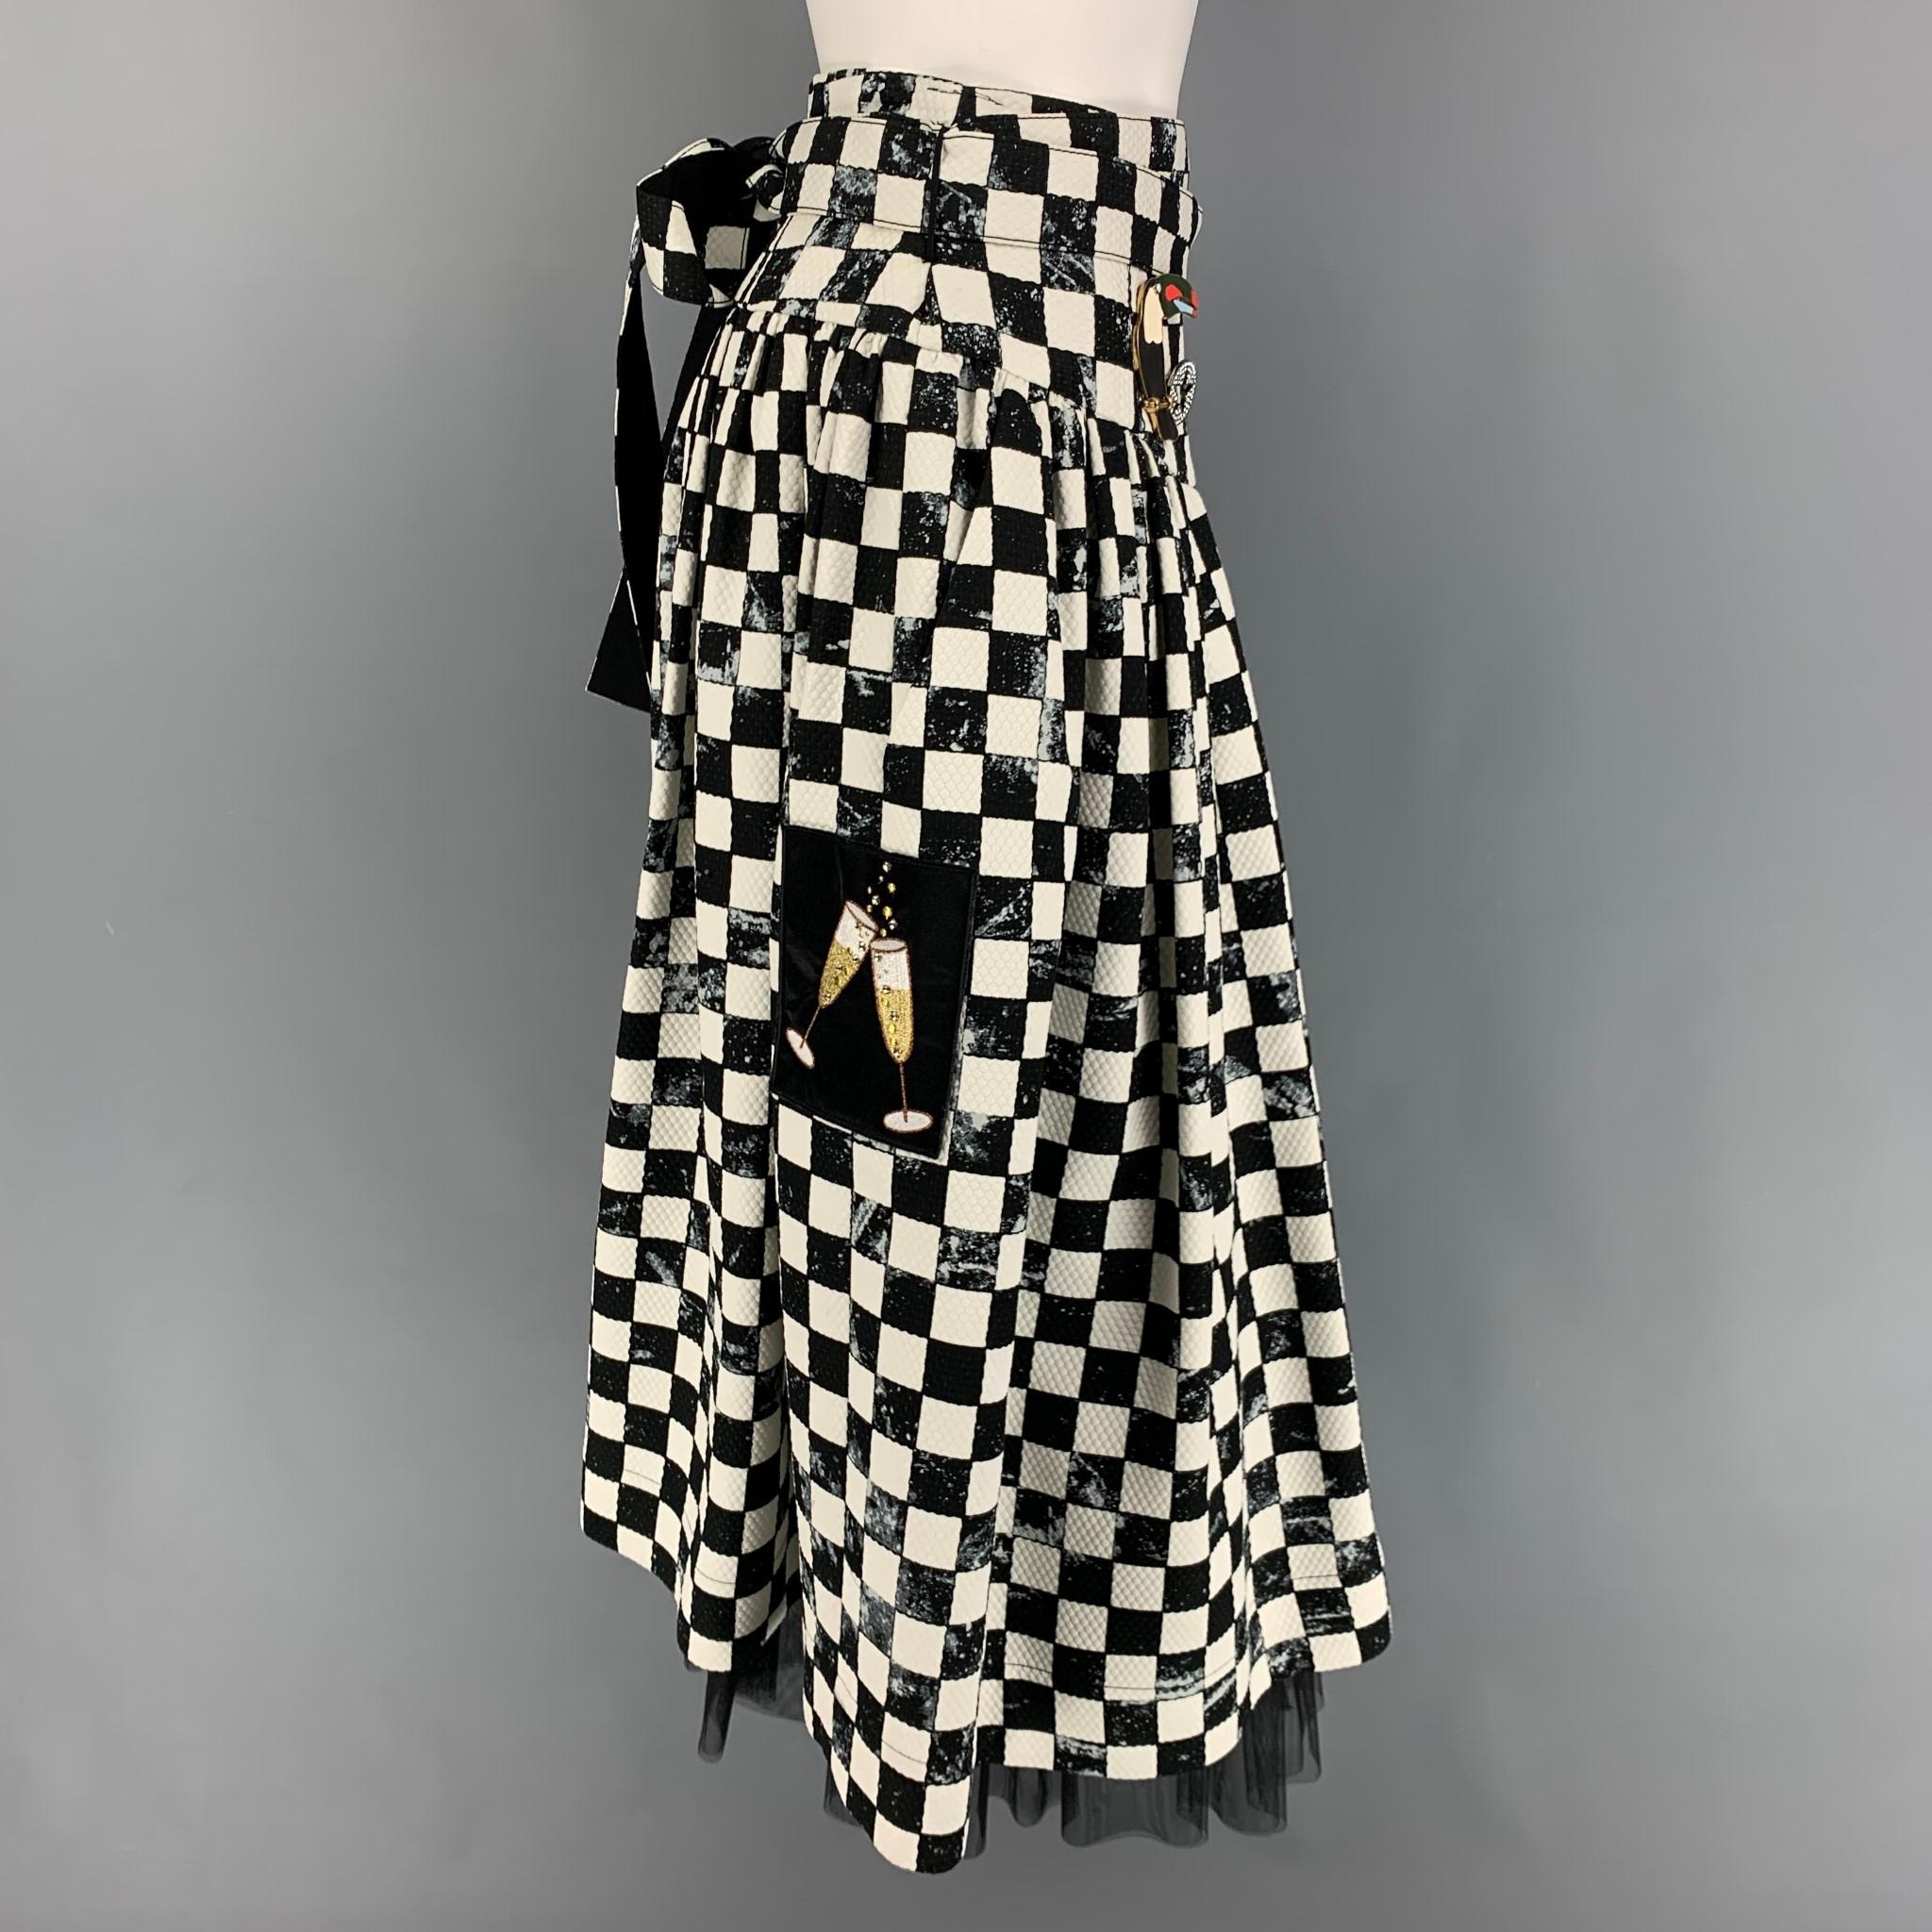 MARC JACOBS skirt comes in a black & white checkered cotton blend with a mesh liner featuring a circle style, two pin details, patches, belted, and a back zip up closure. Belt detail could be styled in other ways. 

Excellent Pre-Owned